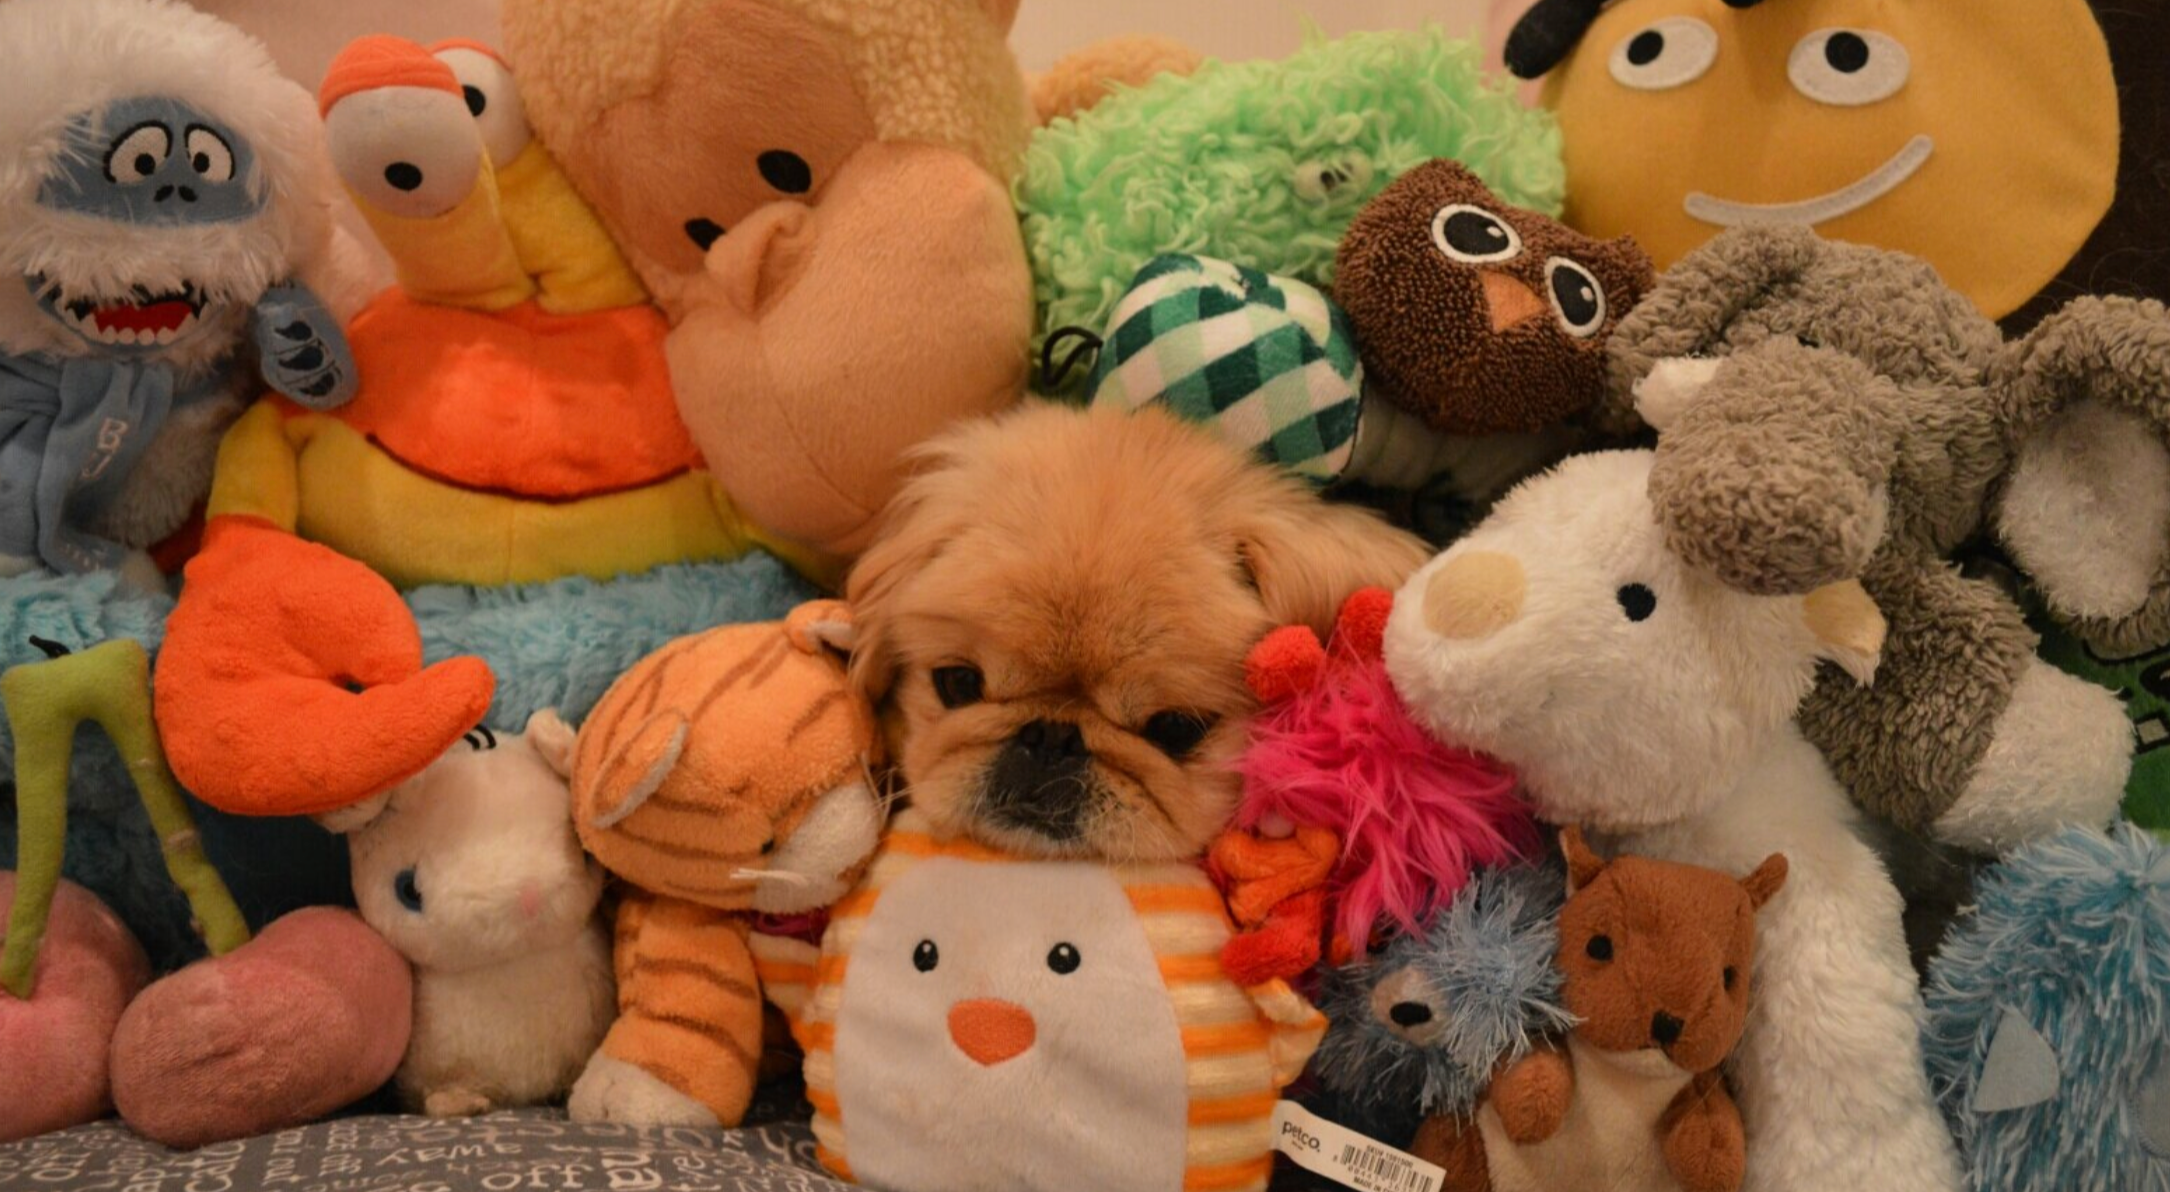 Freddie's Place Animal Hospital and Urgent Care, Freddie hiding between stuffed animals.